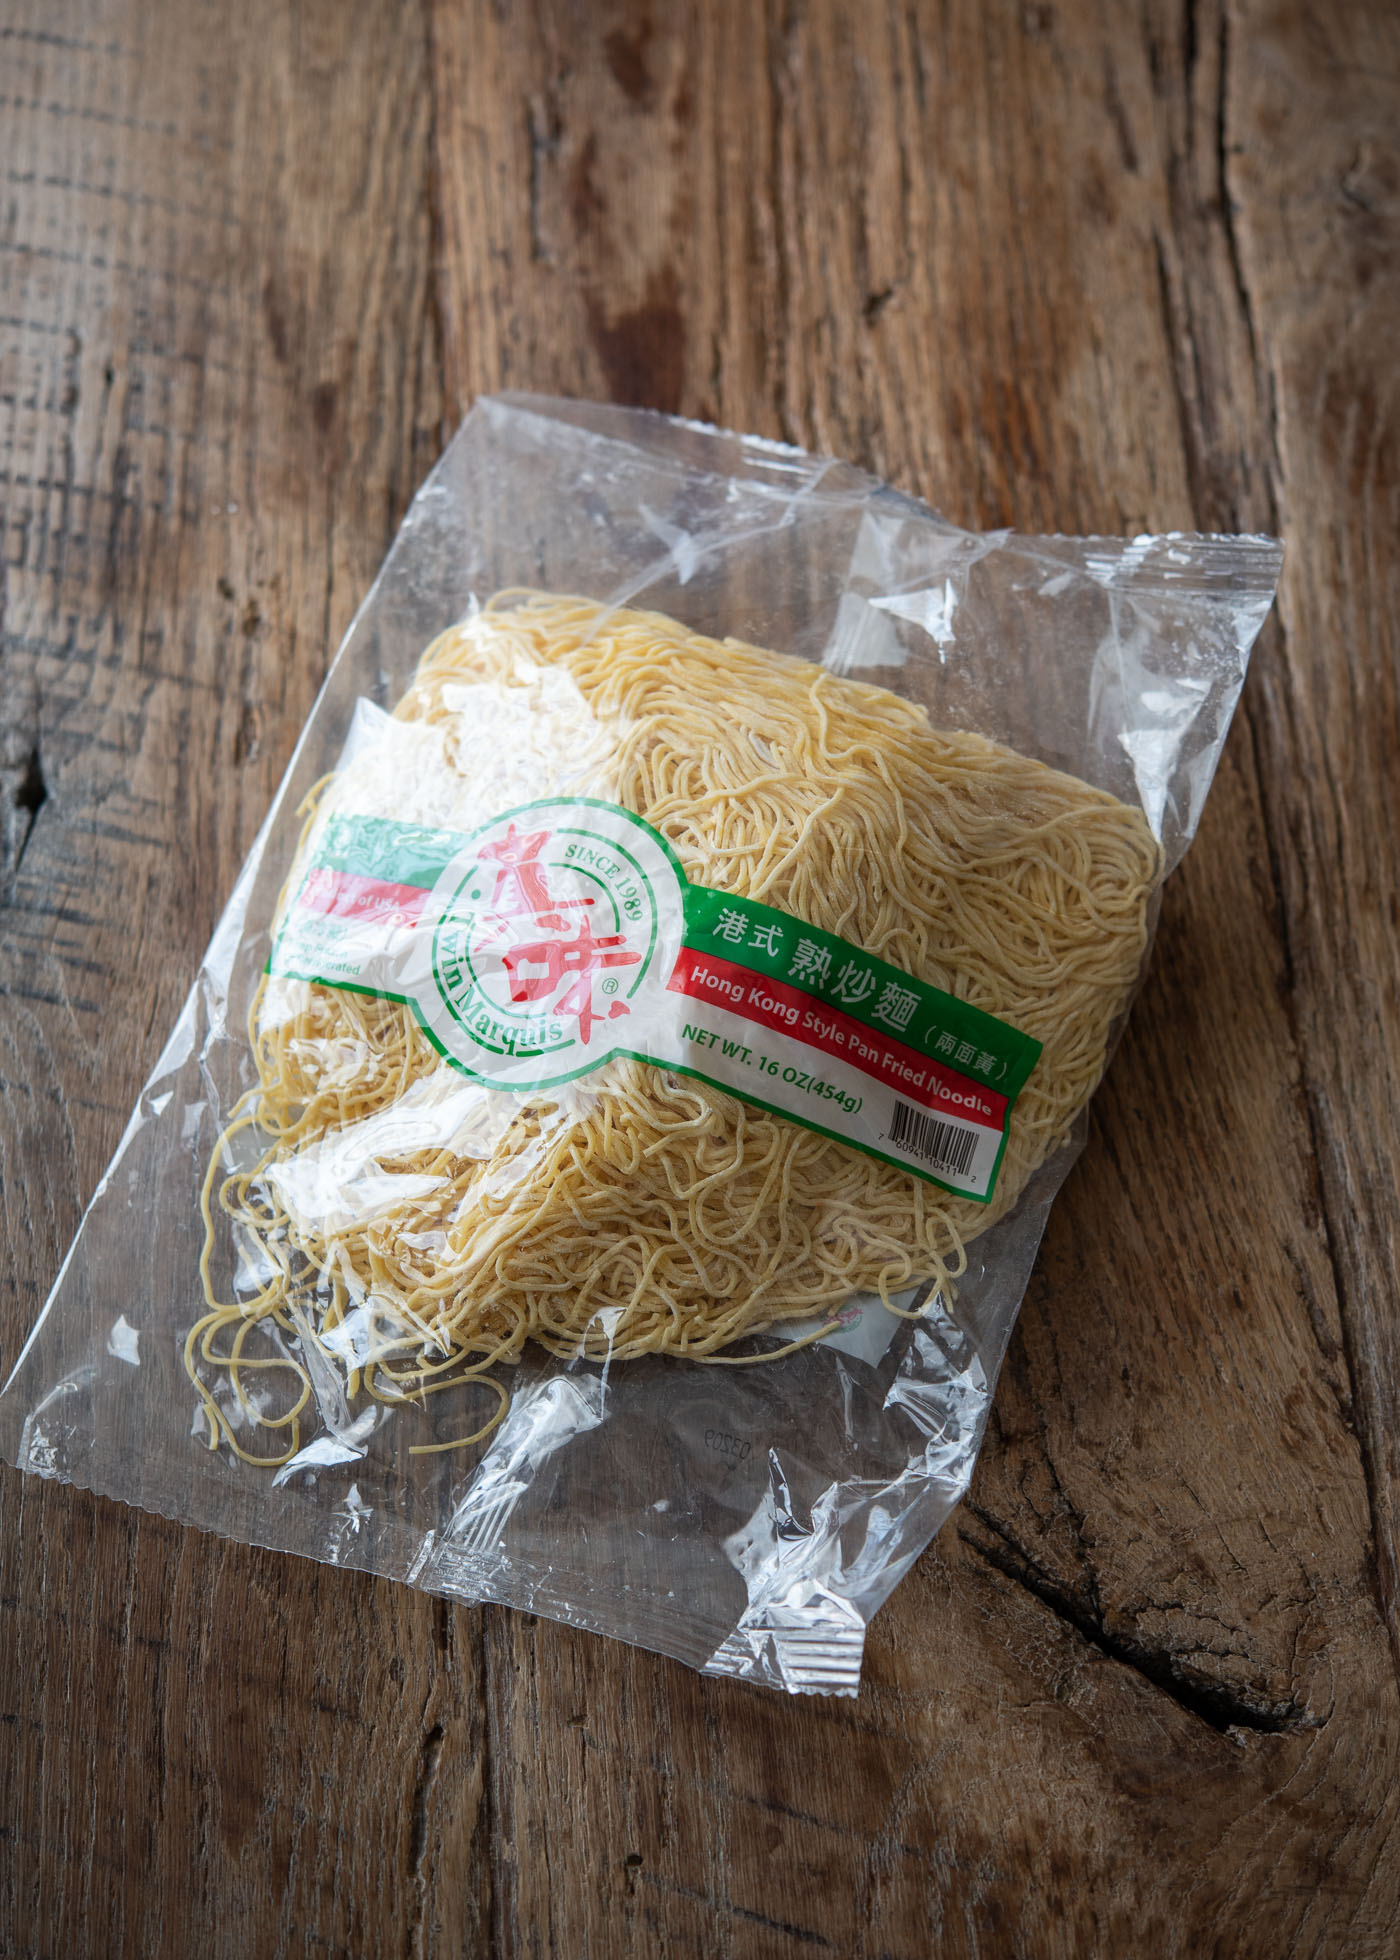 A package of fresh Hong Kong pan fried noodles.